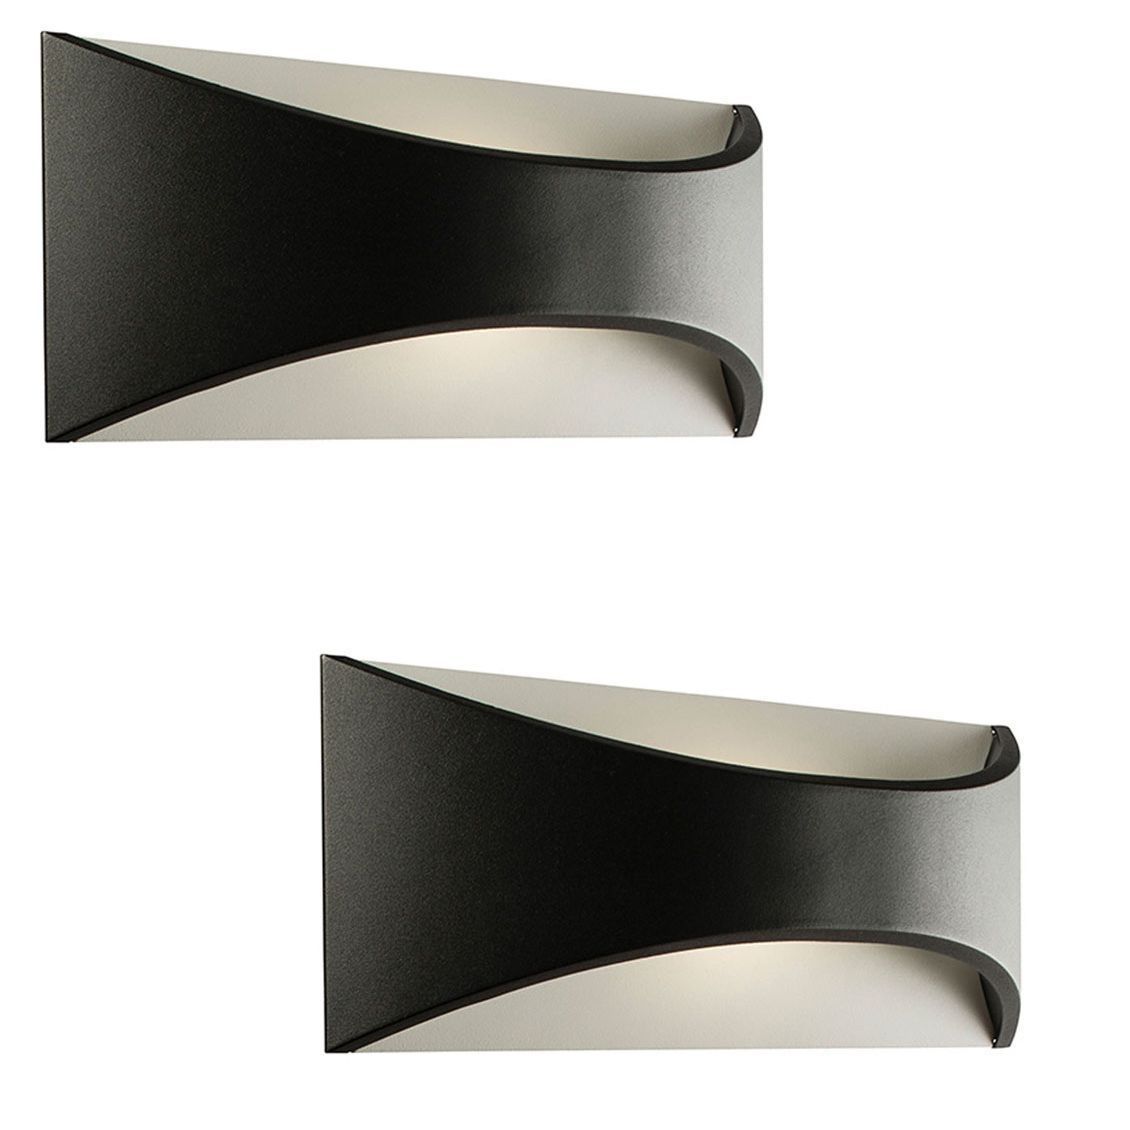 Pair Saxby 61865 Vulcan Matt Black Curved Aluminium 300mm Led With Regard To Led Outdoor Wall Lighting (View 7 of 15)